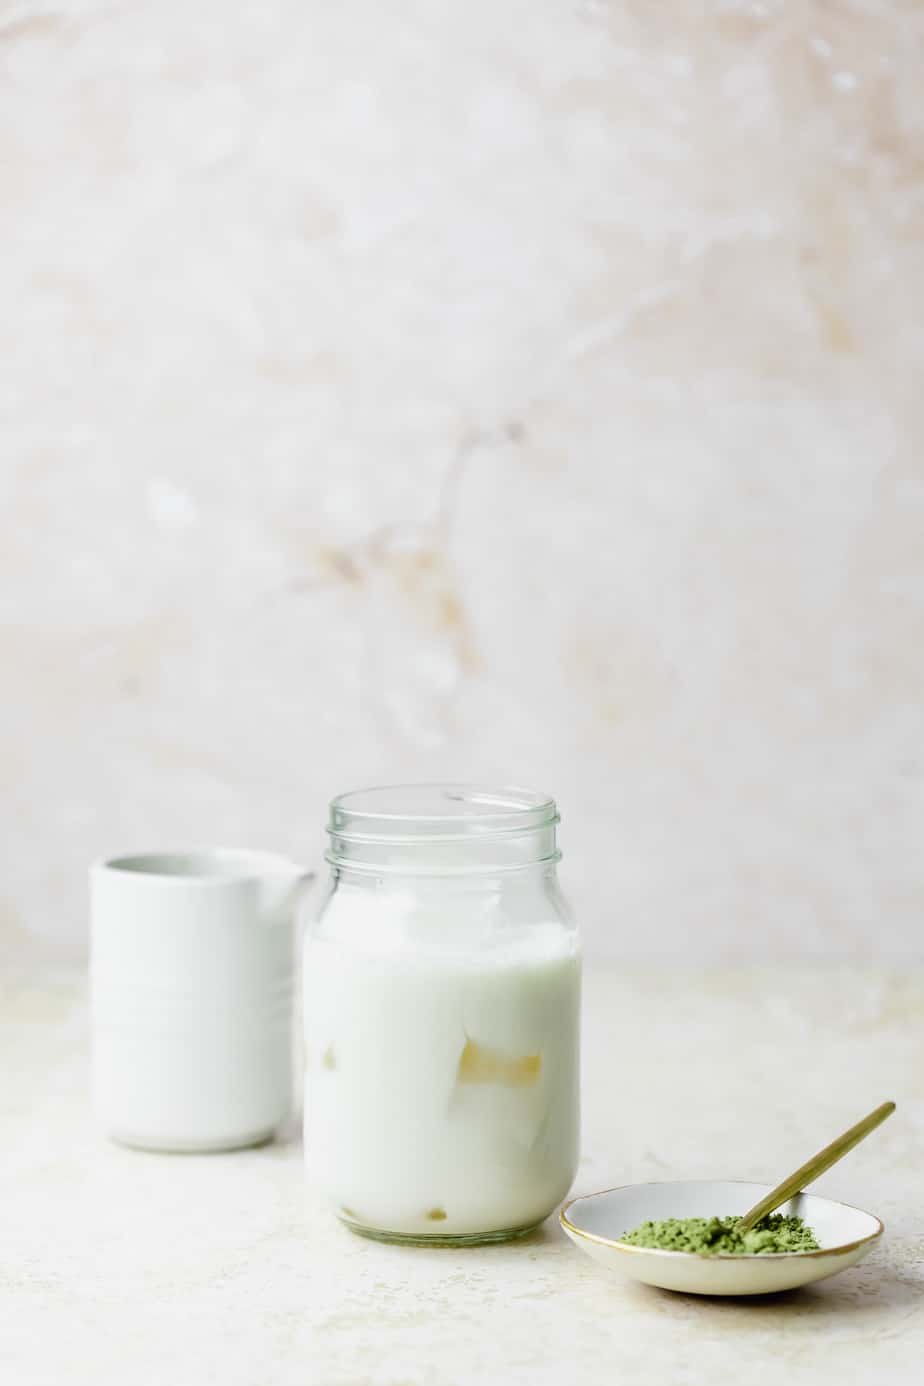 A jar of half and half with a white jug.